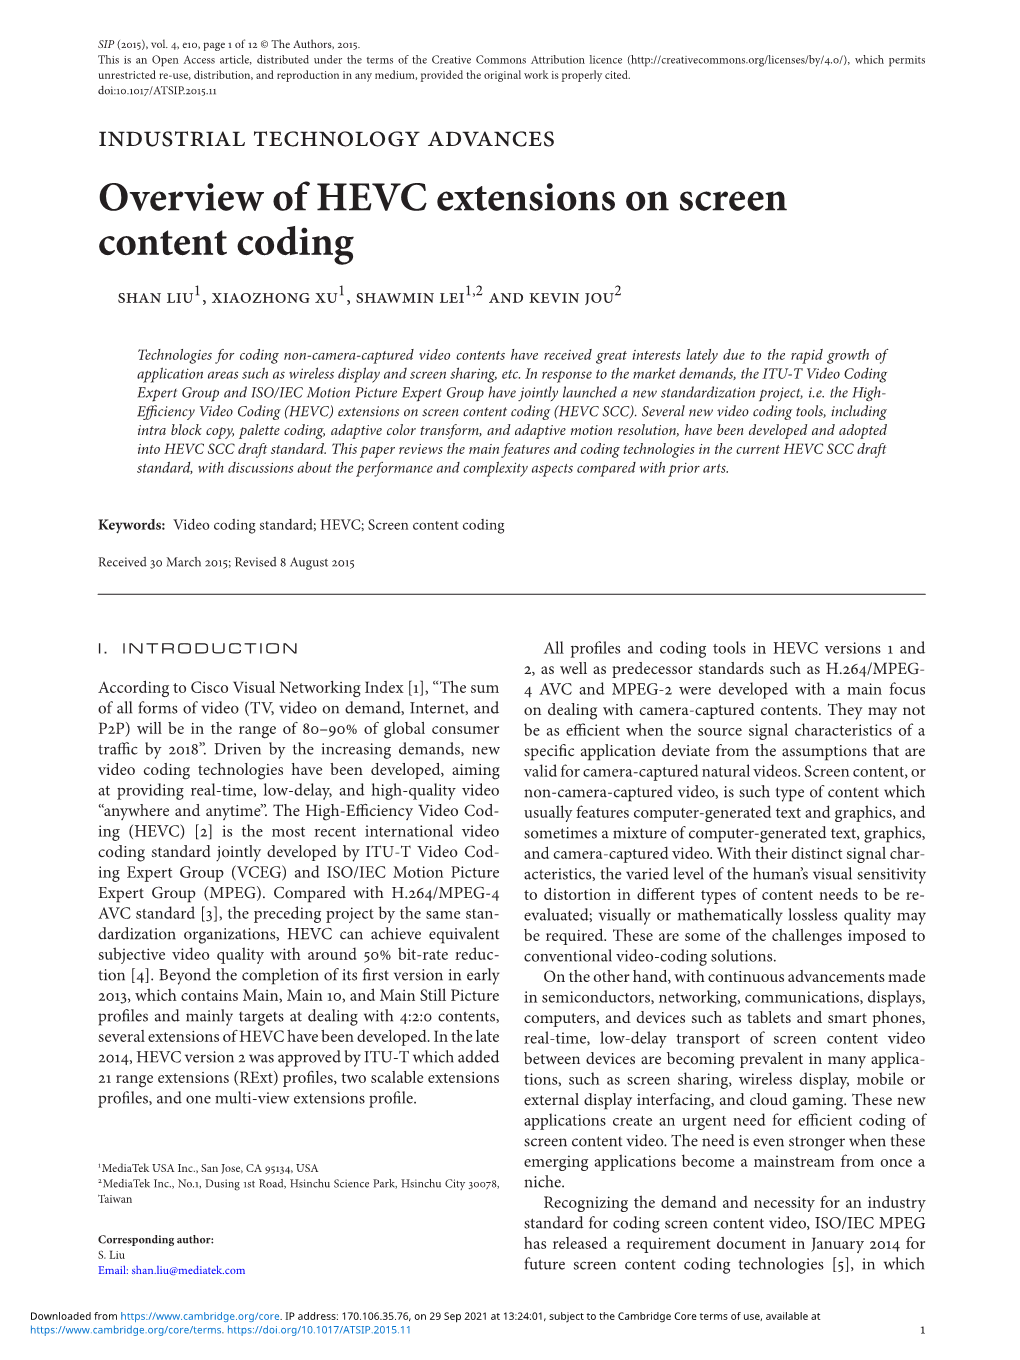 Overview of HEVC Extensions on Screen Content Coding